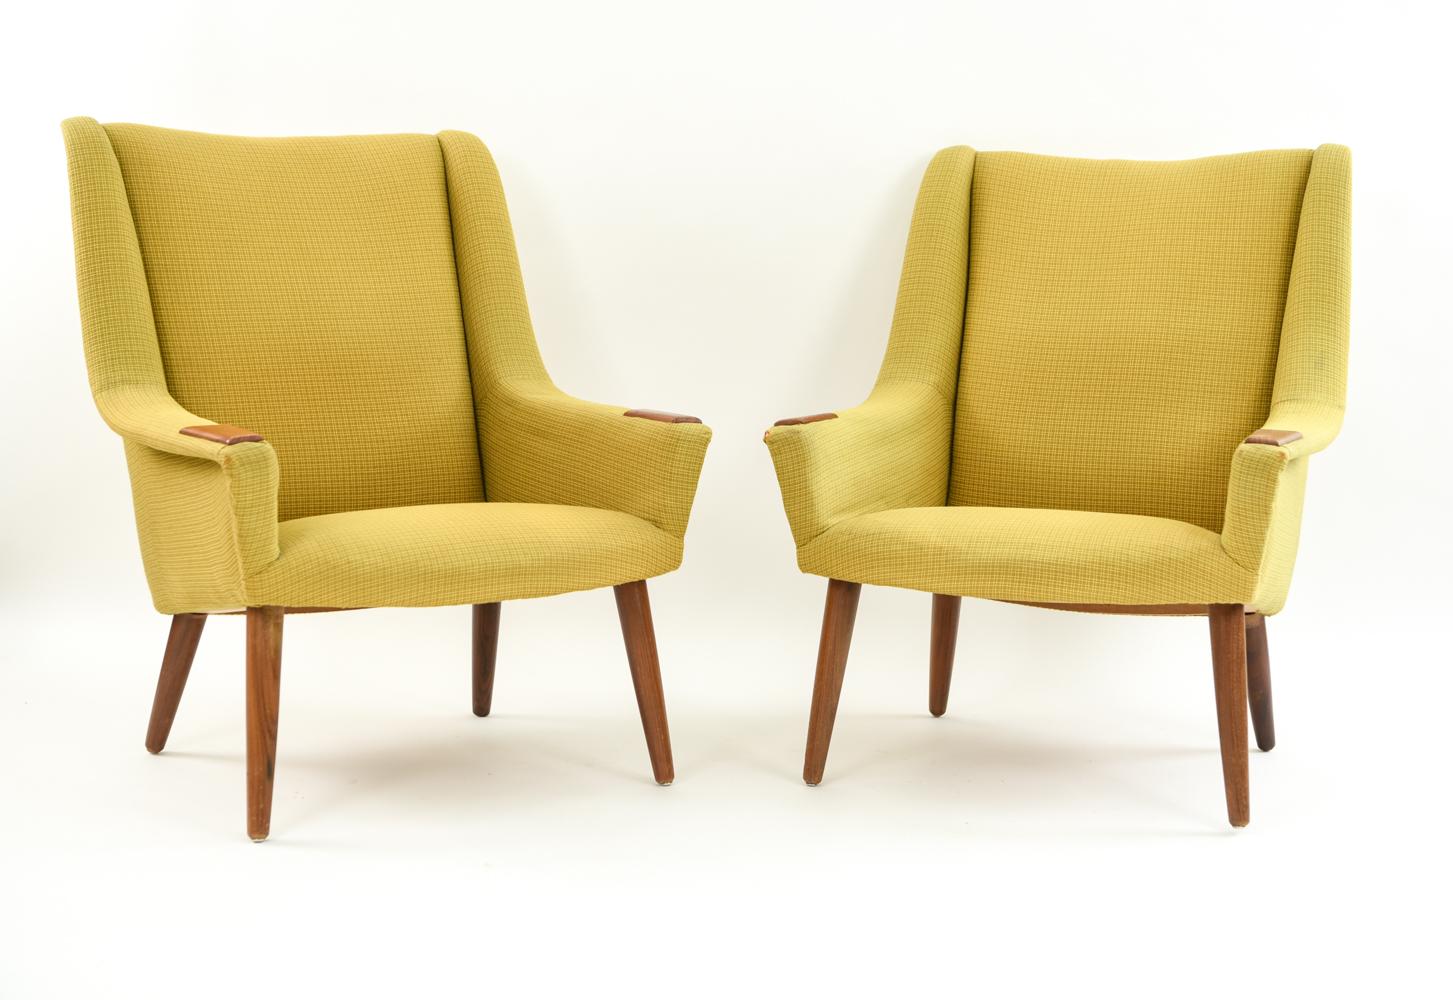 This Danish midcentury seating suite includes a blue upholstered sofa and two green upholstered lounge chairs. Featuring an attractive wood detail on the arms and modern angled legs, this suite epitomizes timeless Scandinavian midcentury design.